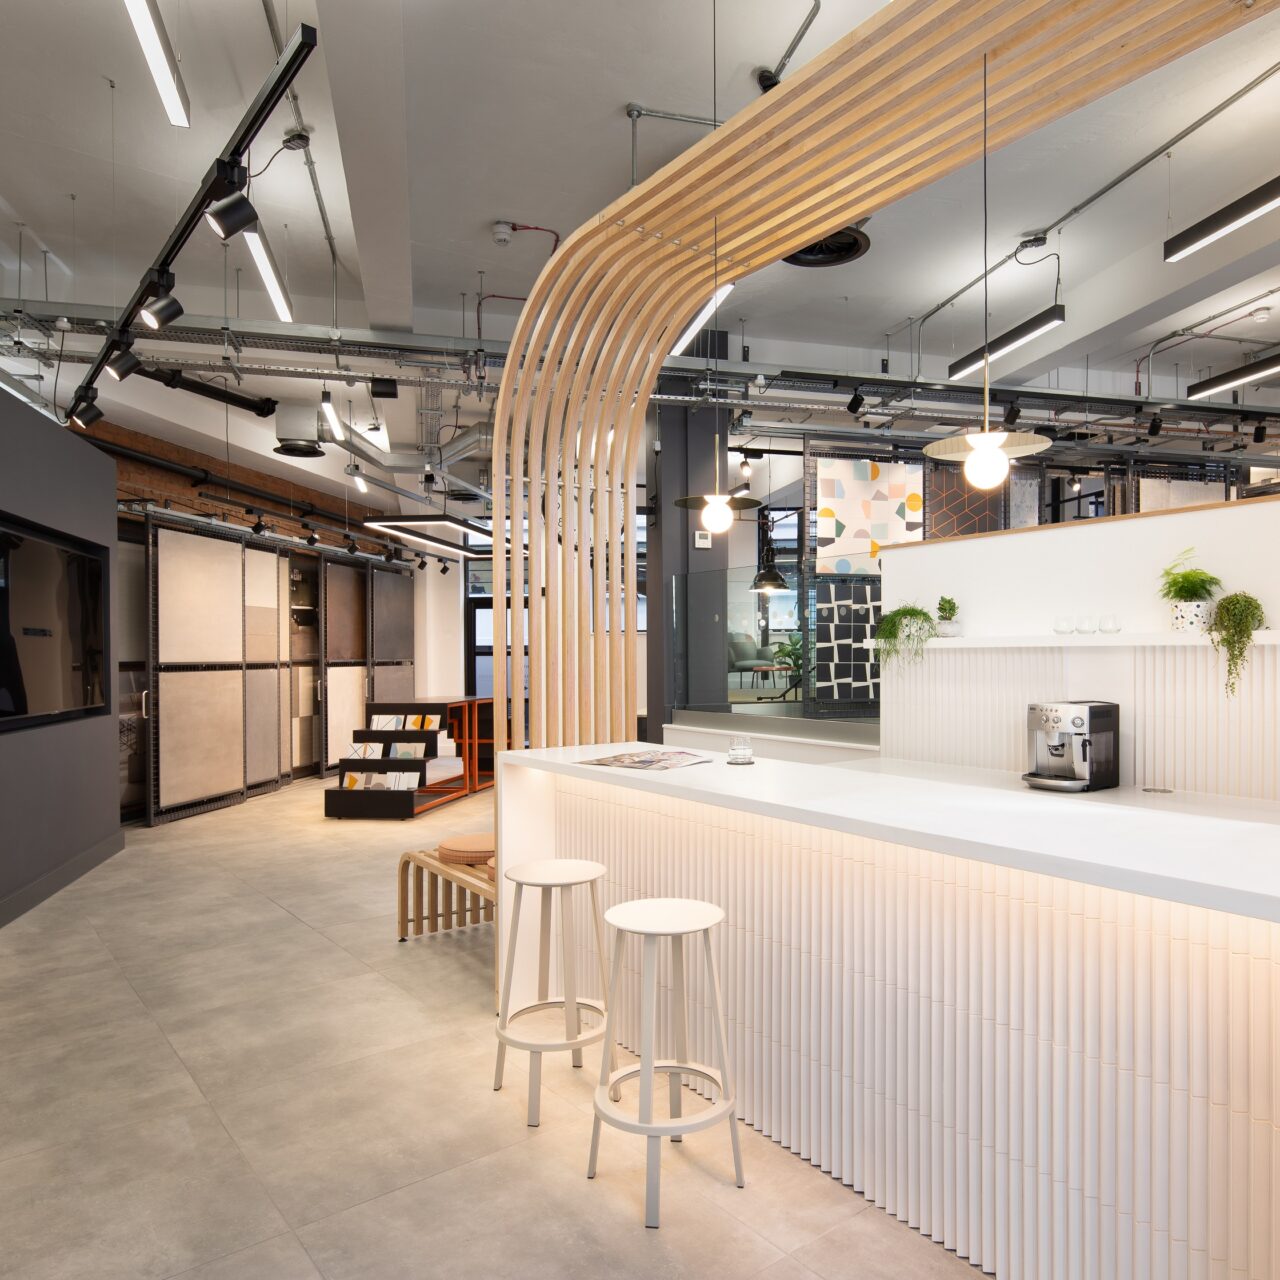 An interior shot of a building, with a coffee bar and flooring samples on the walls.